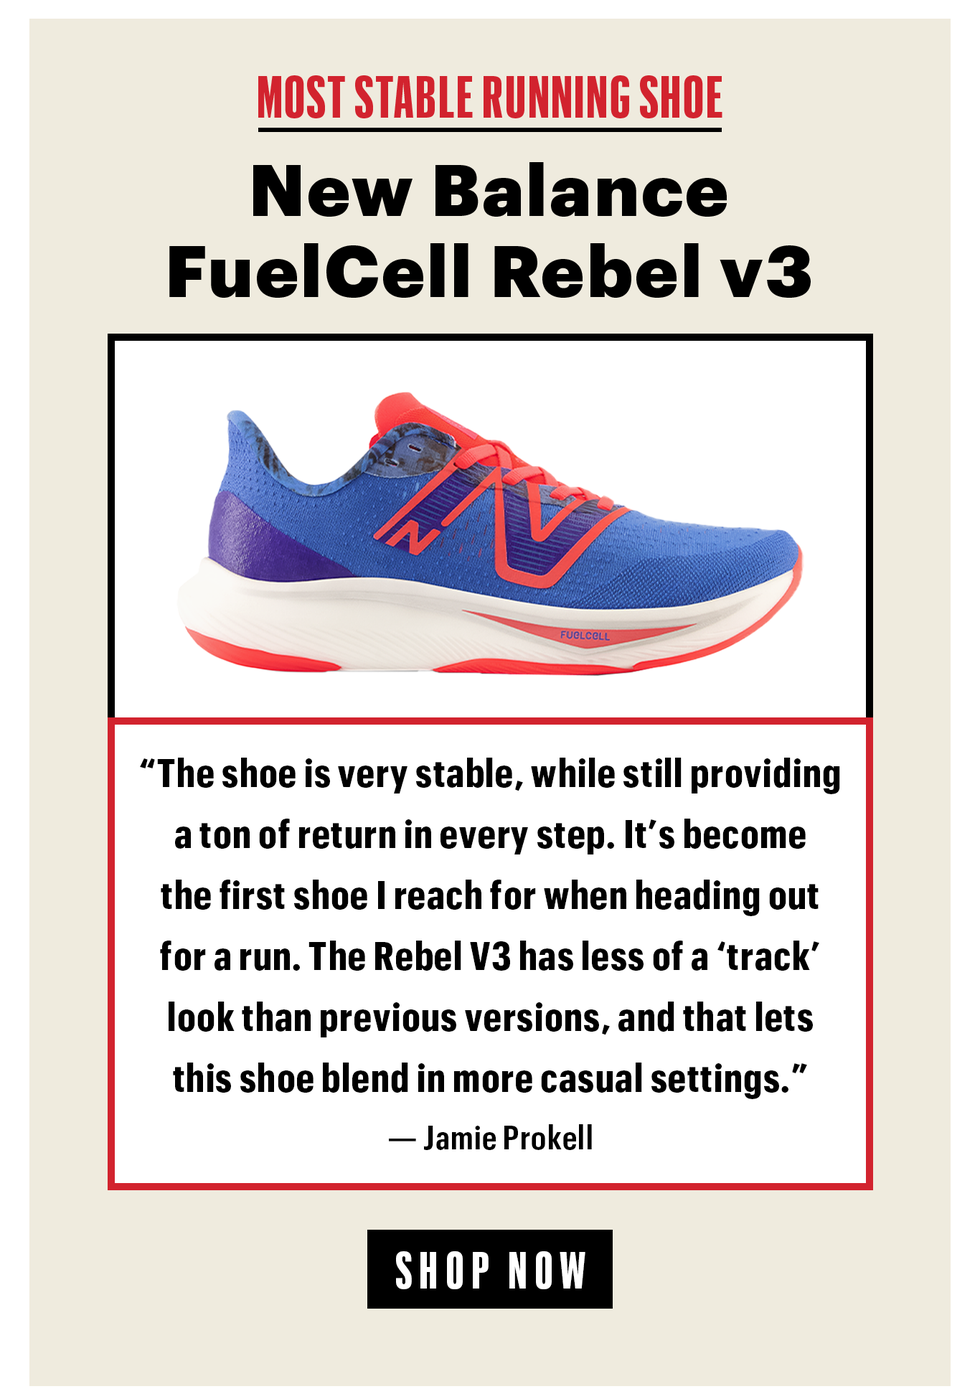 new balance fuelcell rebel v3